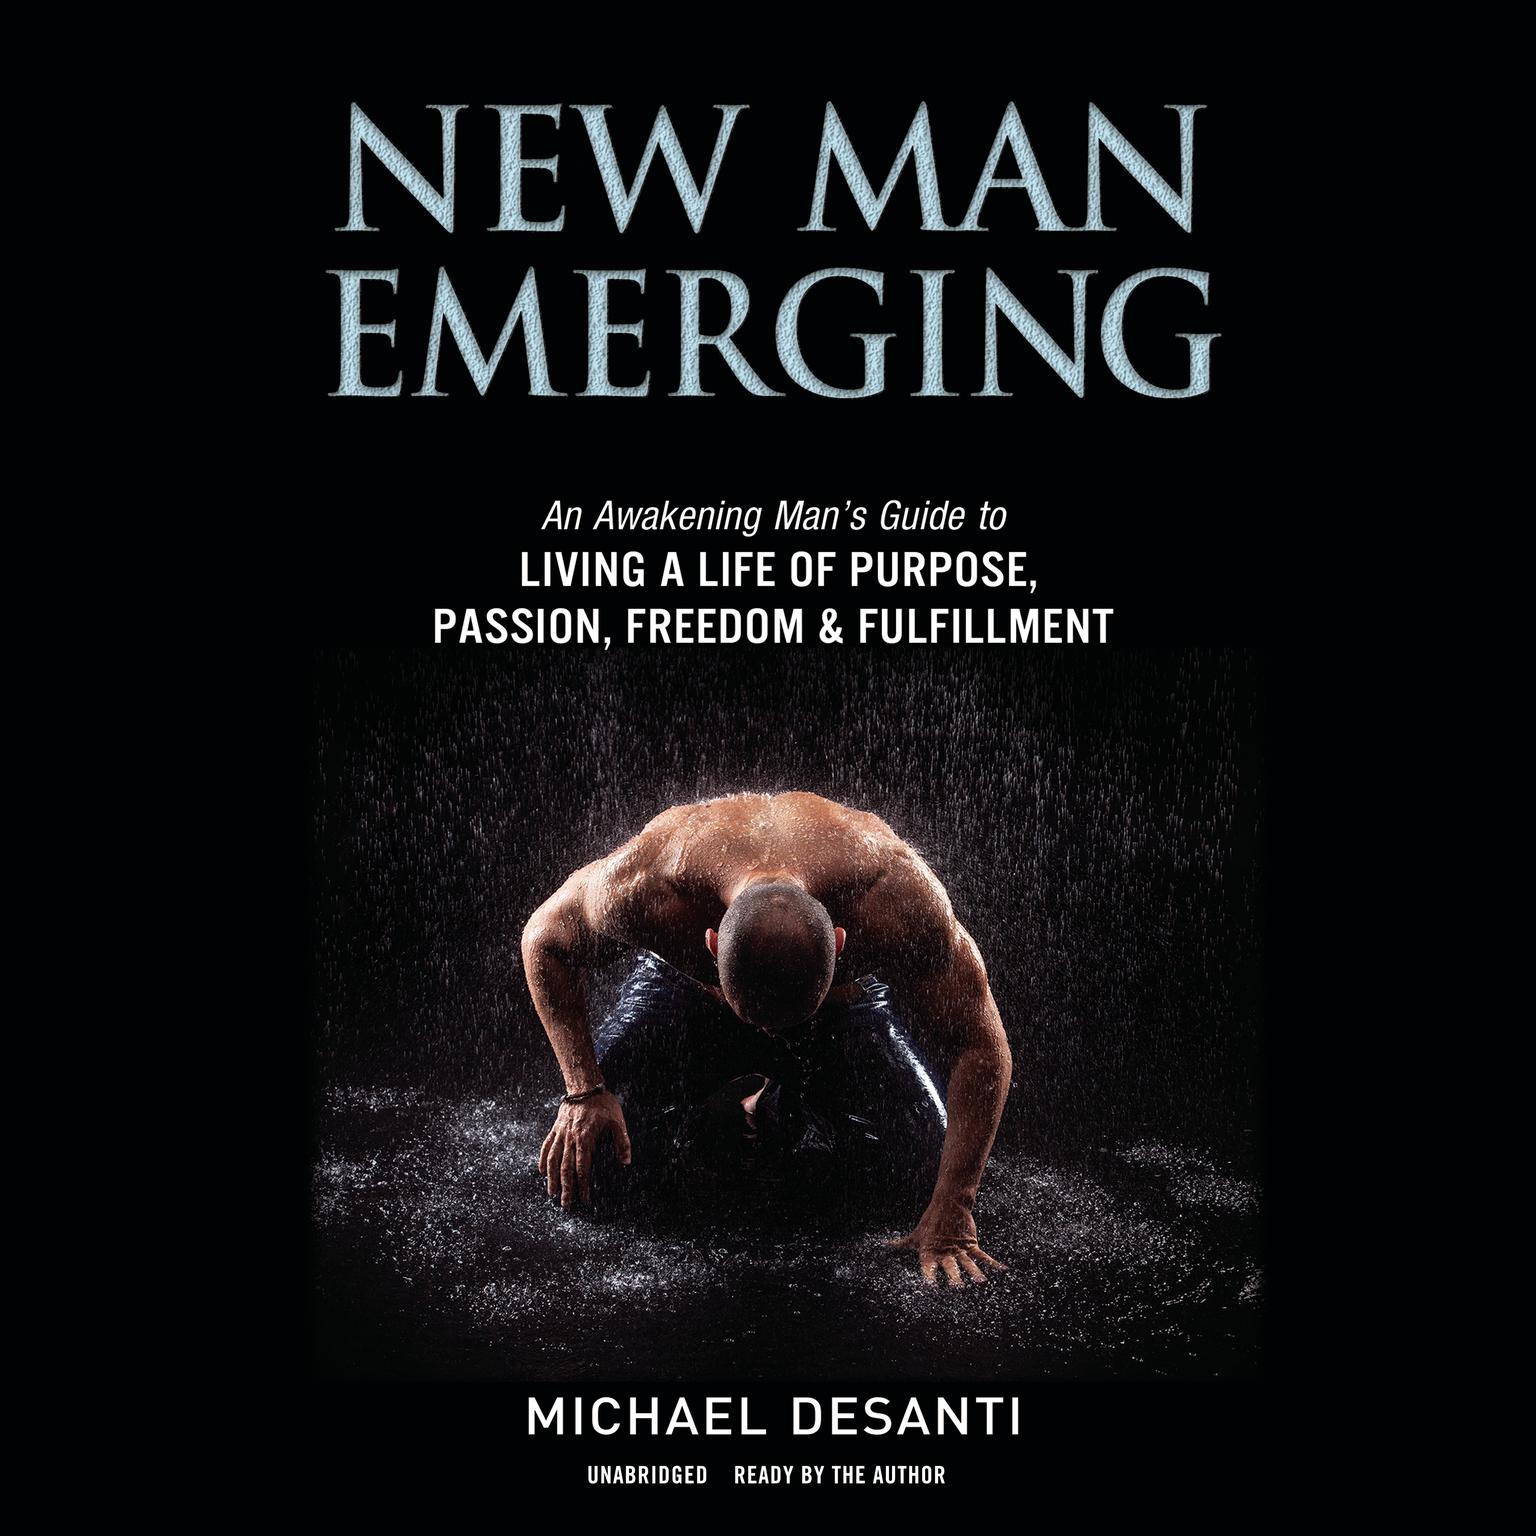 New Man Emerging: An Awakening Man’s Guide to Living a Life of Purpose, Passion, Freedom & Fulfillment  Audiobook, by Michael DeSanti